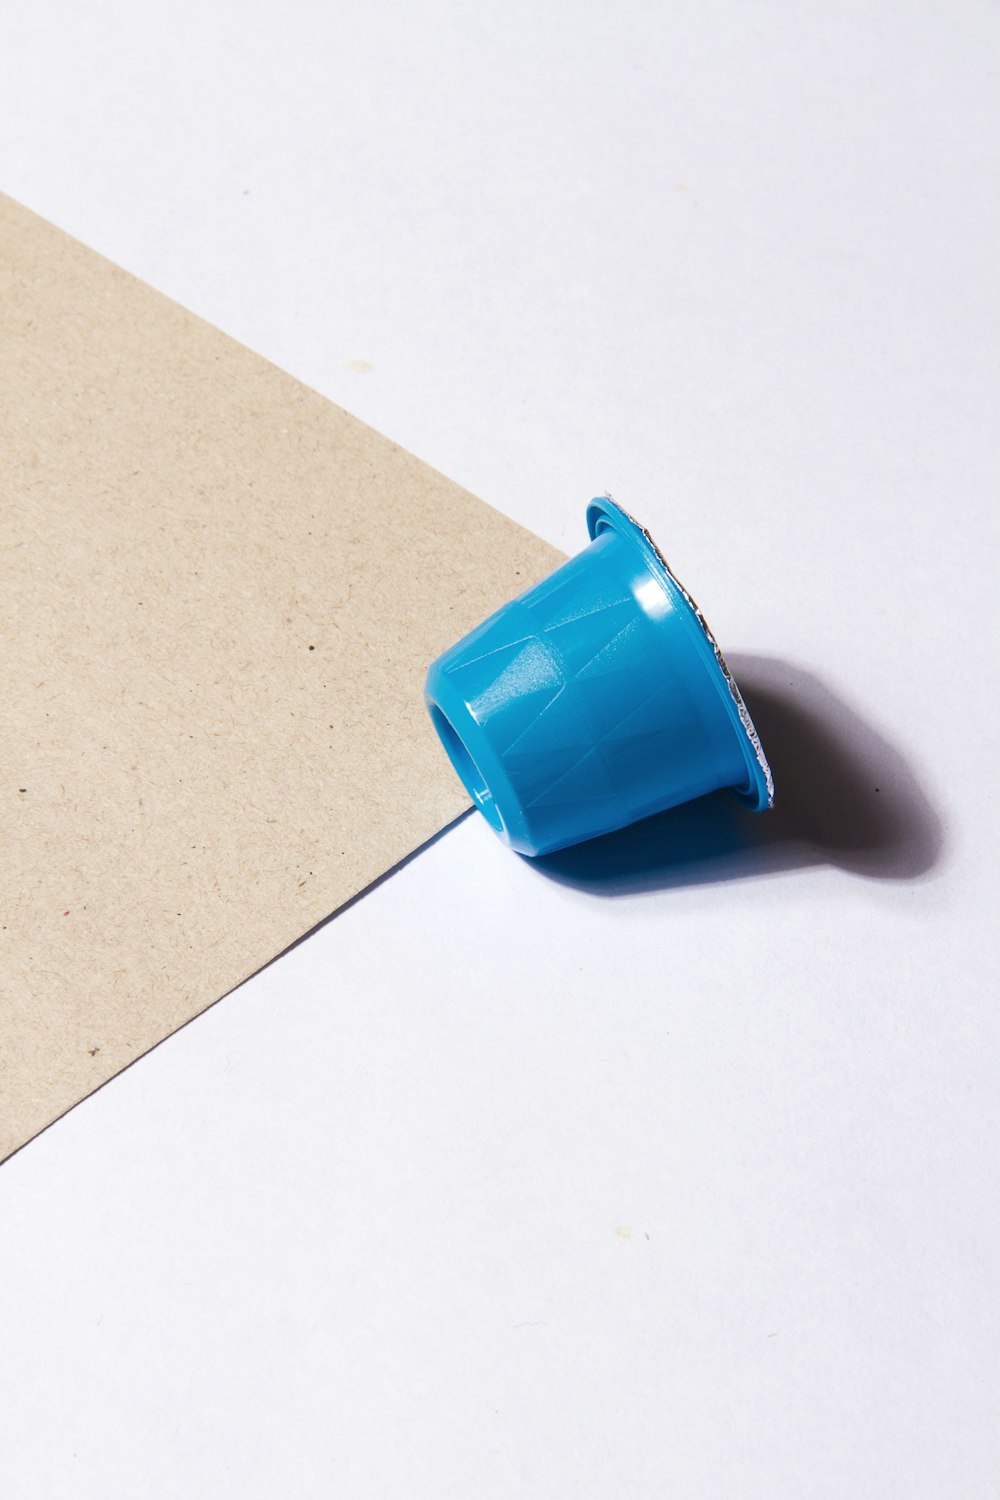 a blue cup sitting on top of a piece of paper